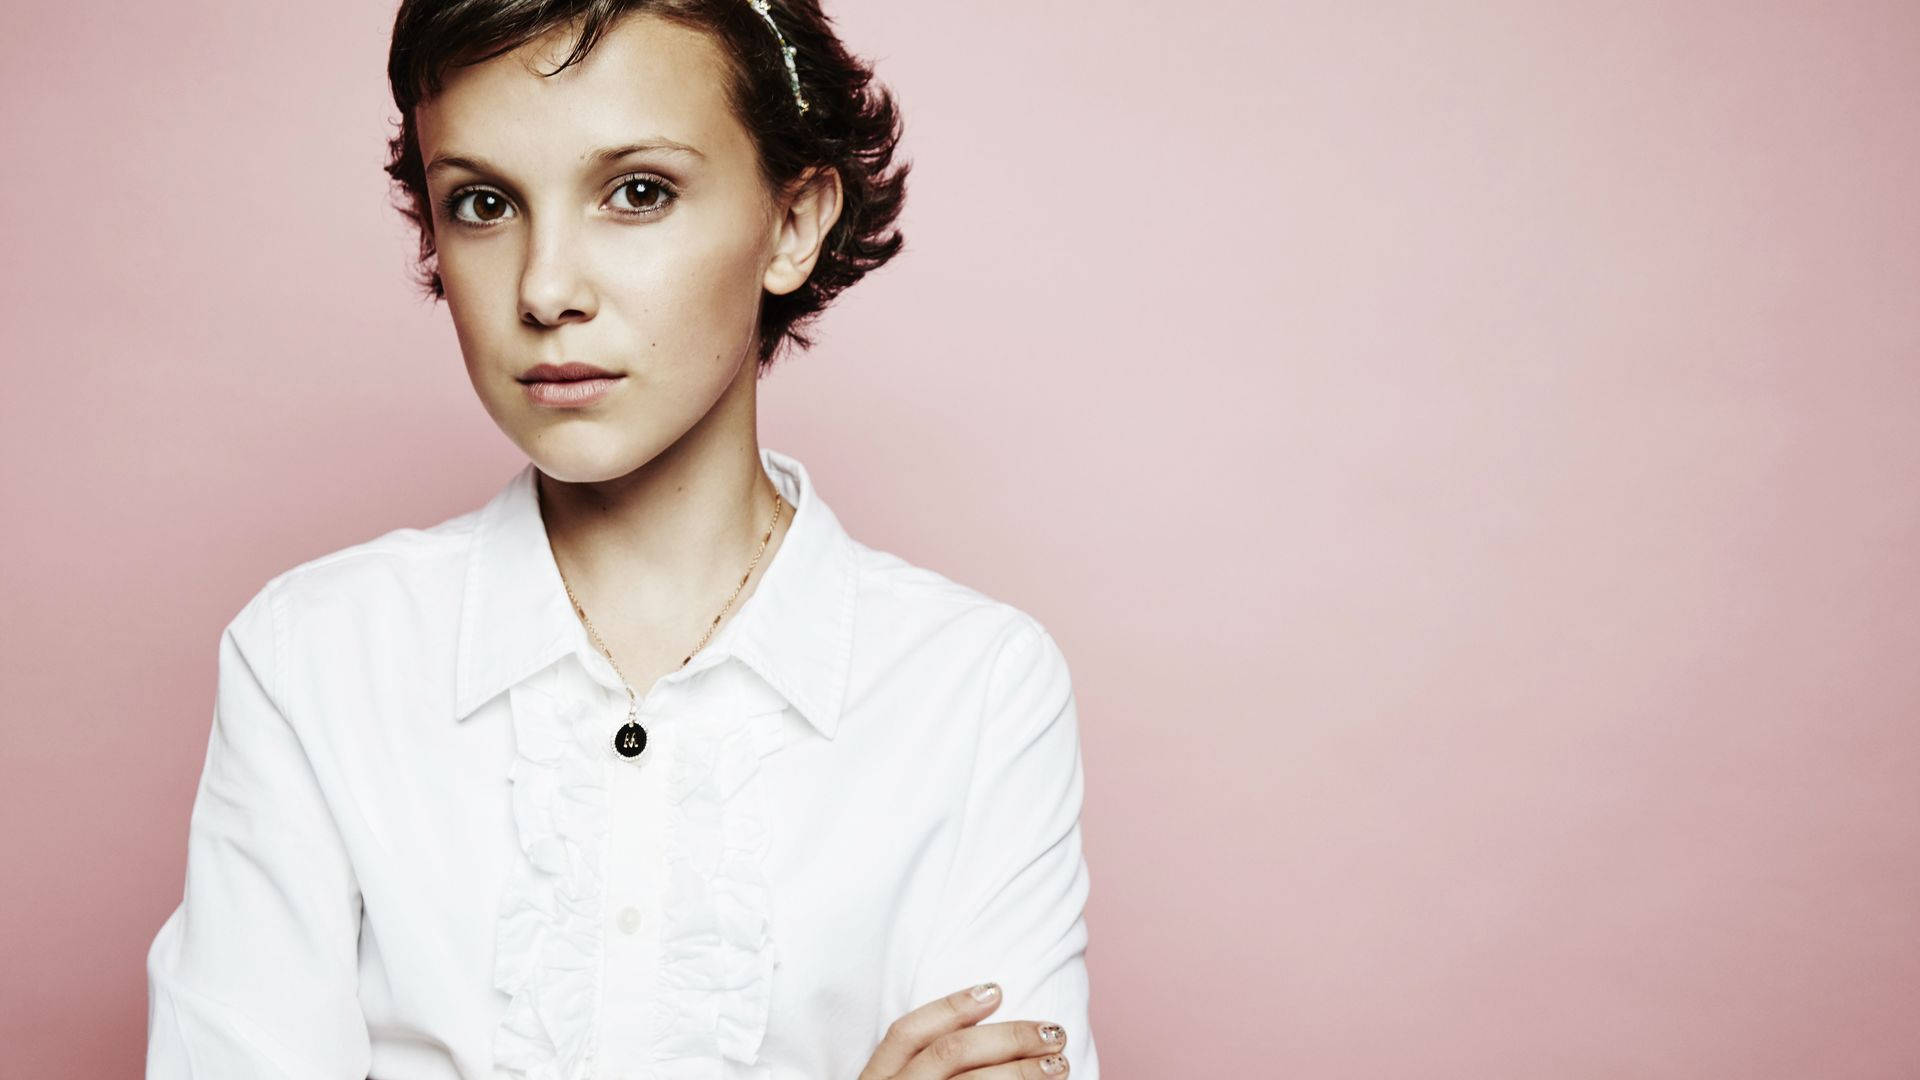 Millie Bobby Brown Showing Off A Fierce Look Background